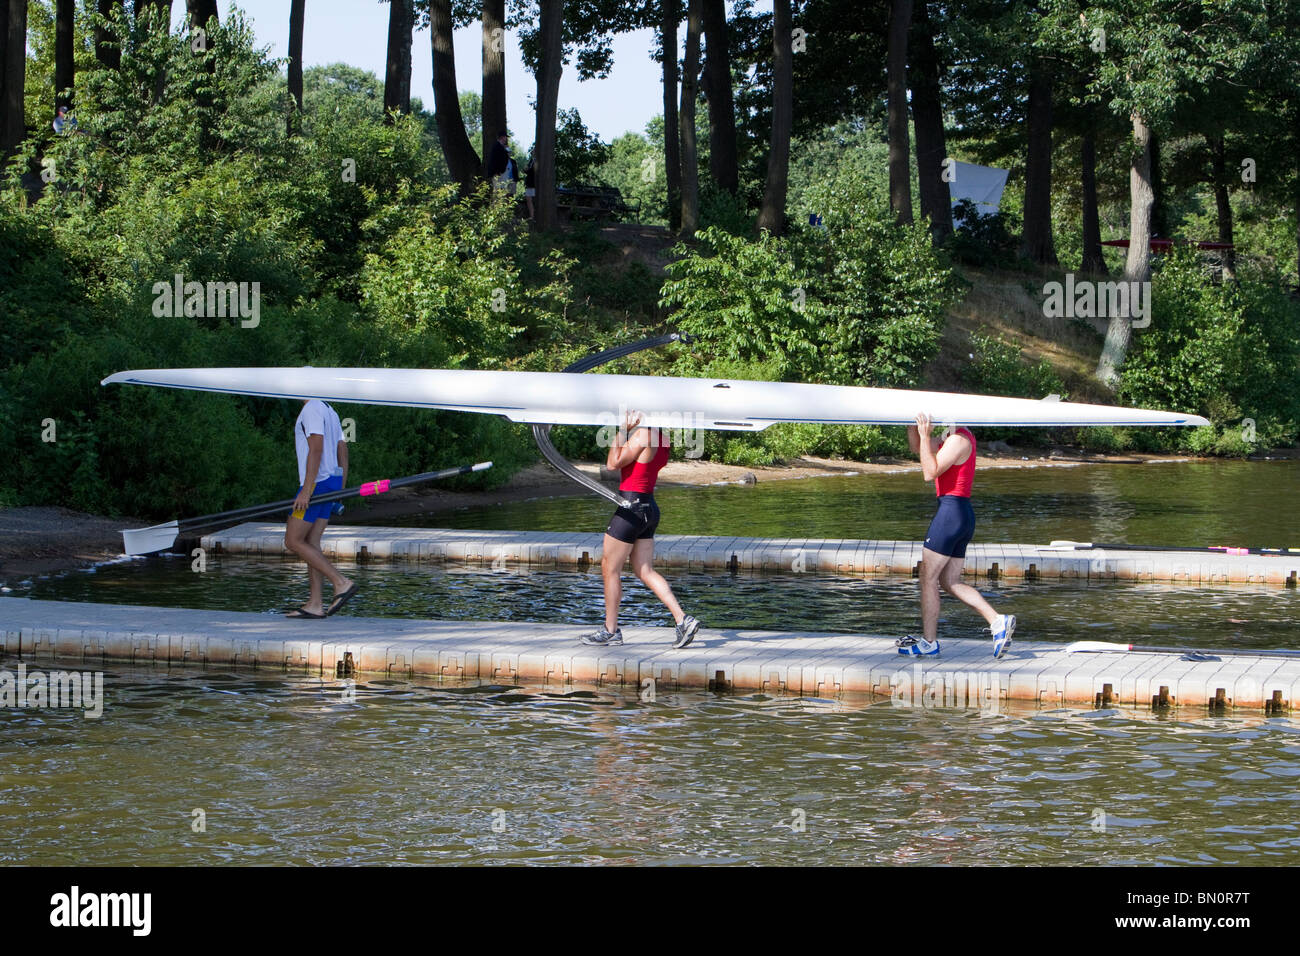 At the dock at the United States National Championship Regatta rowing. Taking out and carrying the boats. Stock Photo